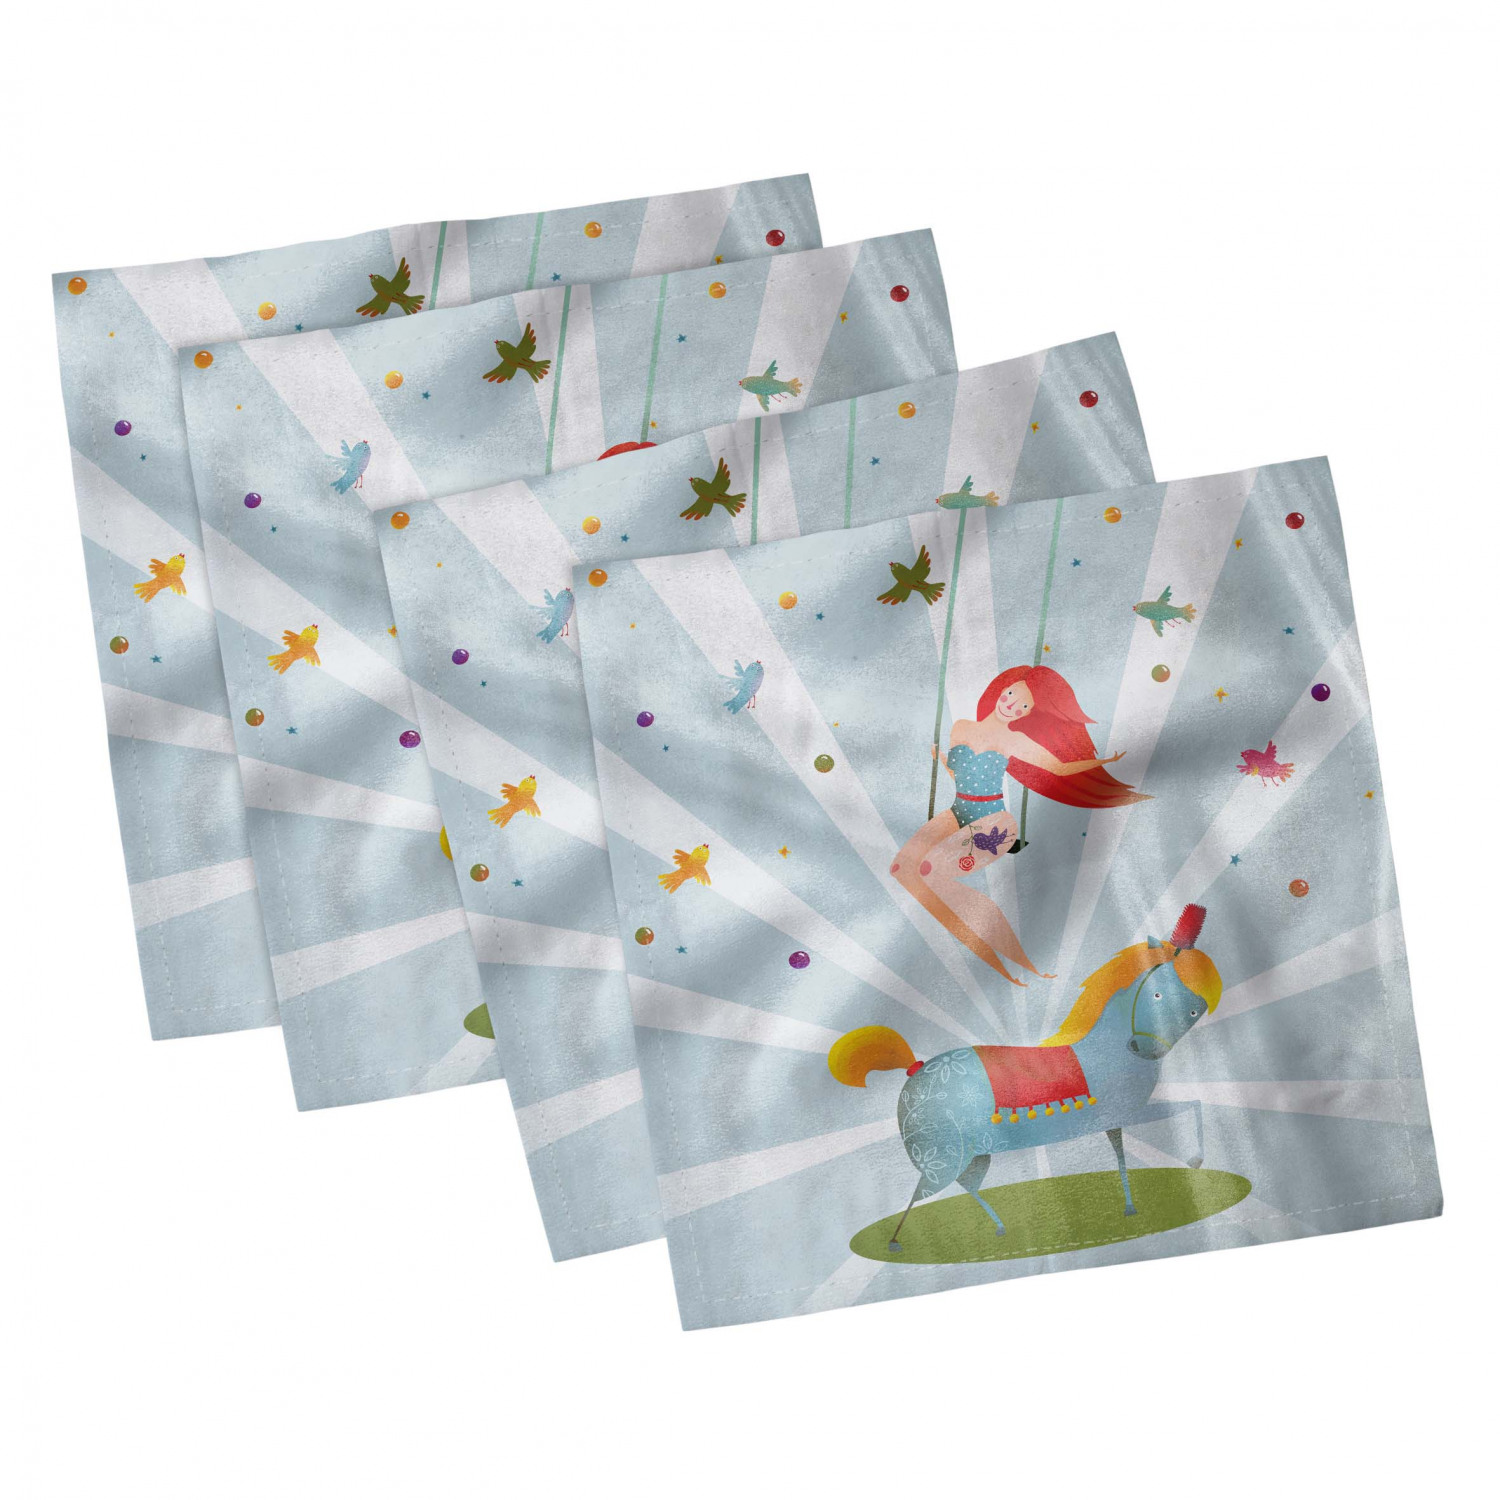 Details about   Ambesonne Cartoon Art Decorative Satin Napkins Set of 4 Party Dinner Fabric 